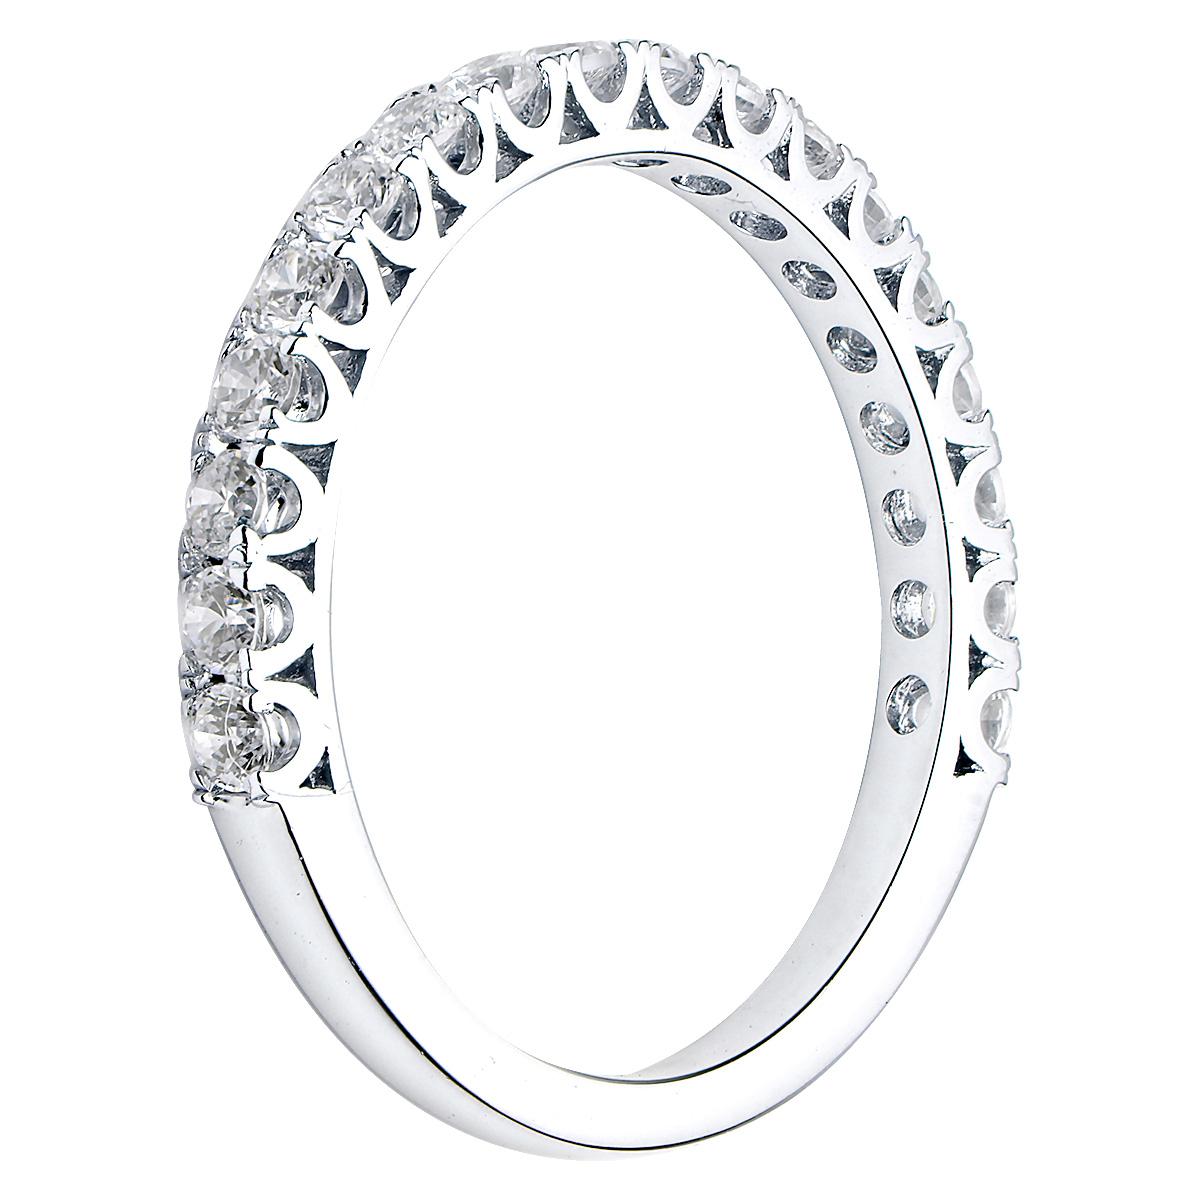 This beautiful classic diamond band has diamonds approximately 2/3 the way around the band that are secured with beautiful prongs. There are 18 round VS2, G color diamonds totaling 0.52 carats which are set in 1.8 grams of 18 karat white gold. This